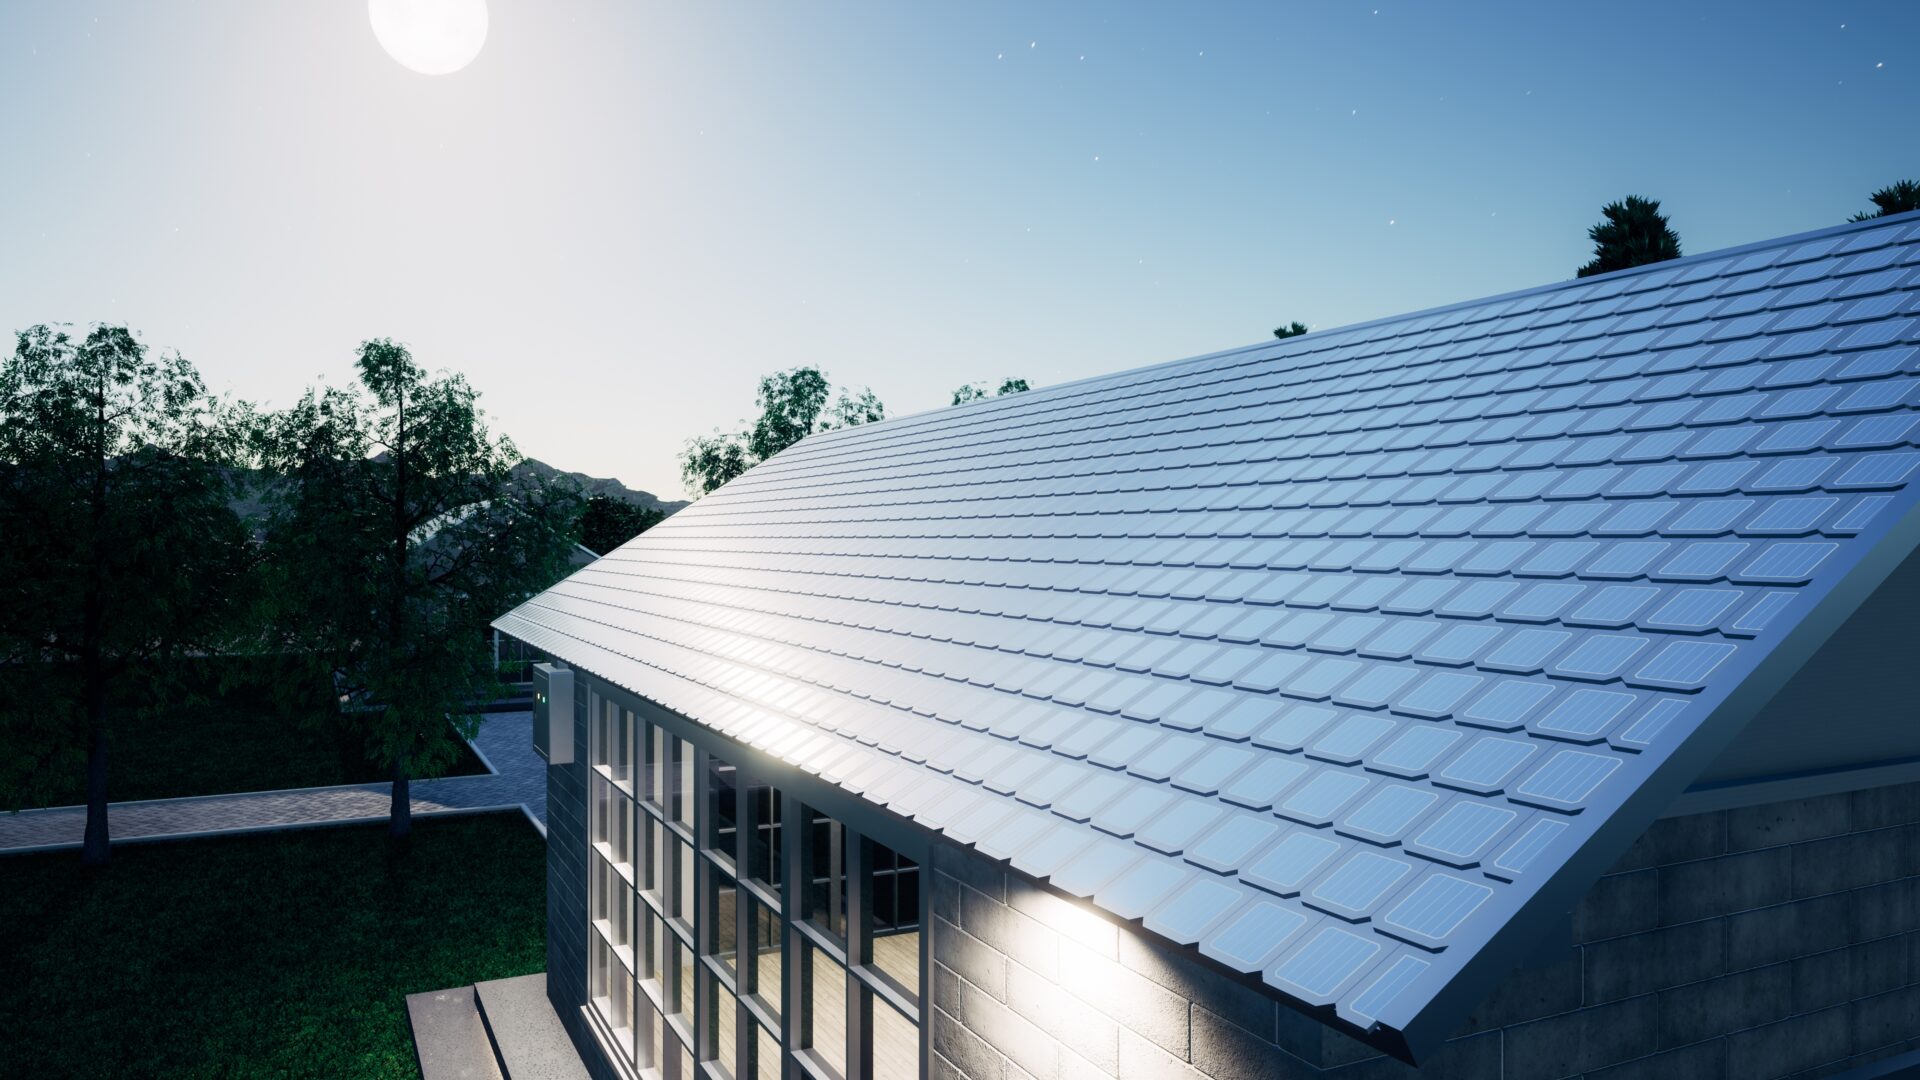 A roof with solar shingles